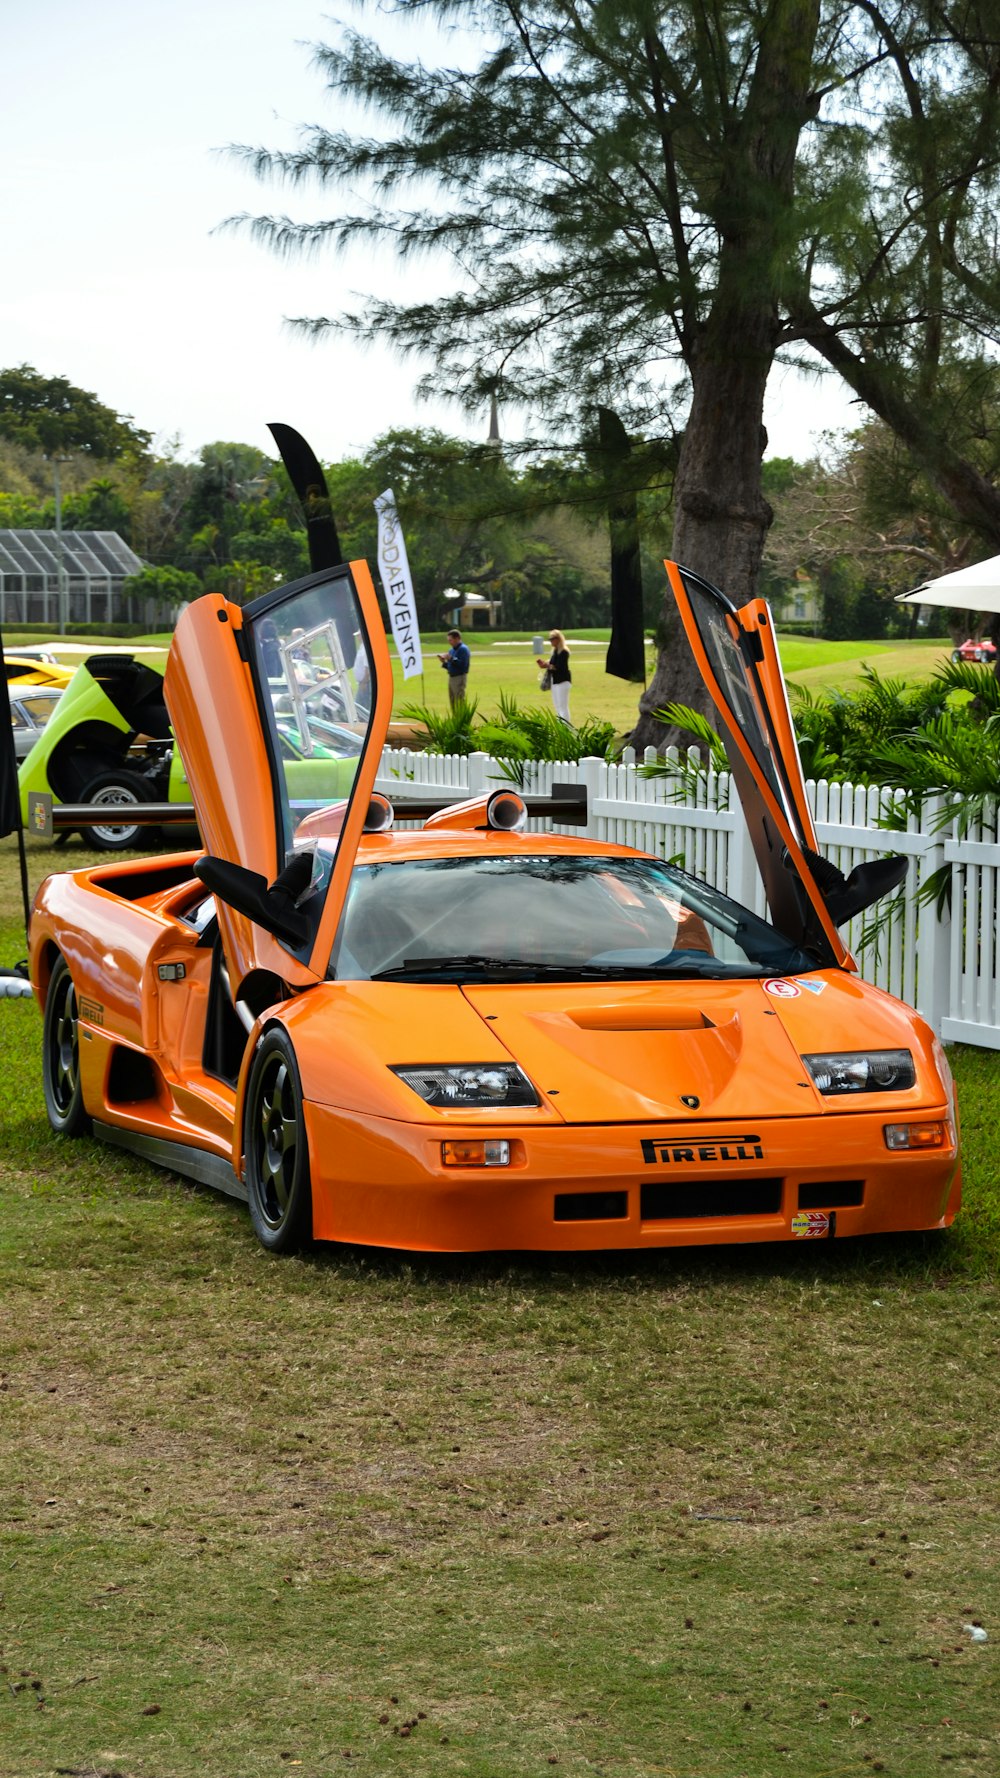 an orange sports car with its doors open